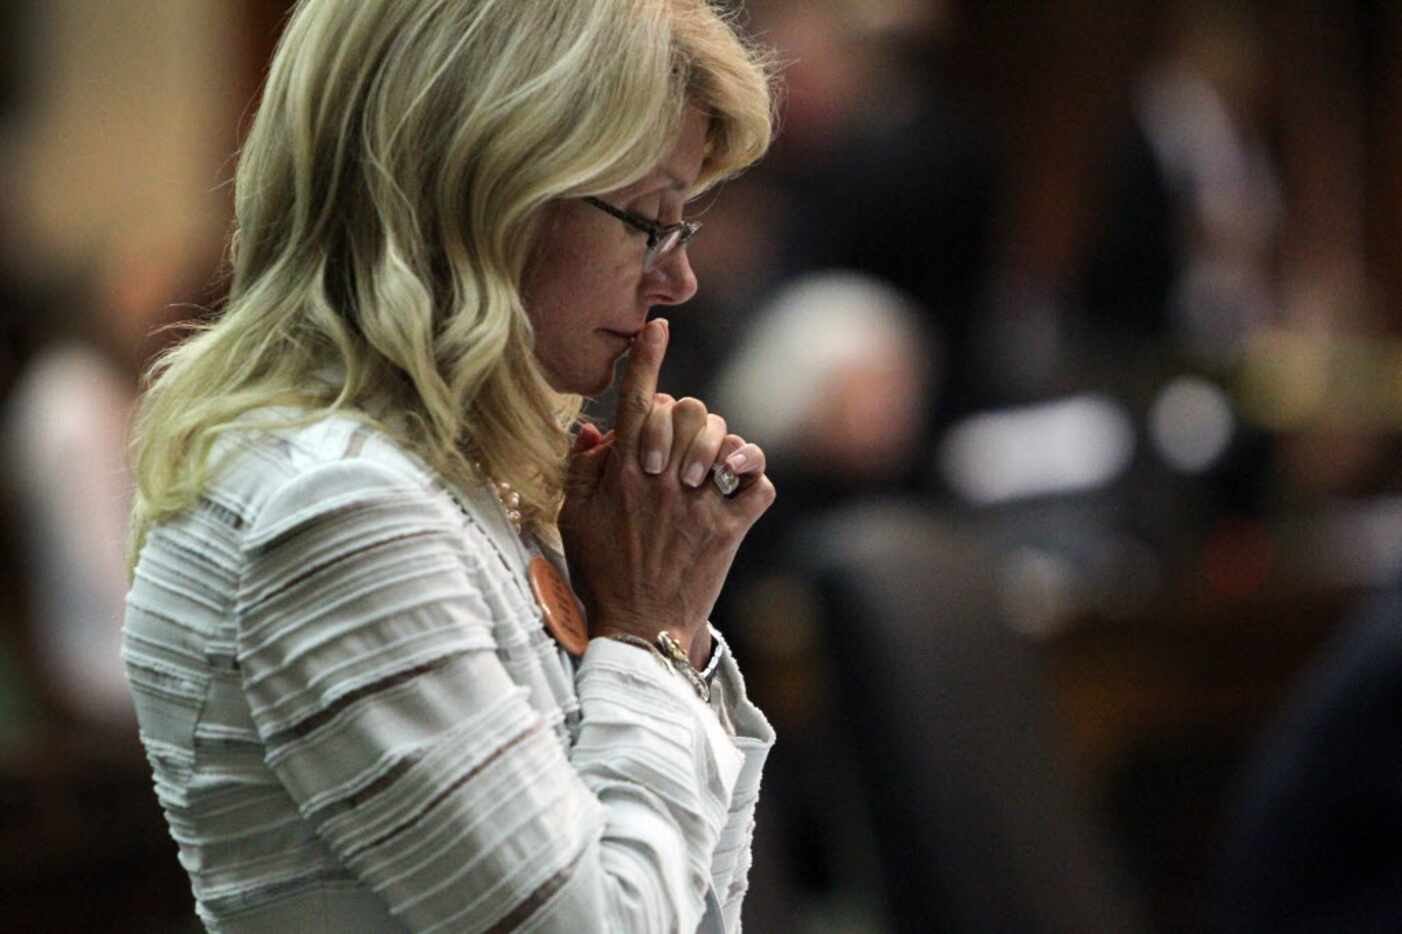 State Sen. Wendy Davis spent a quiet moment after her filibuster was halted on the final day...